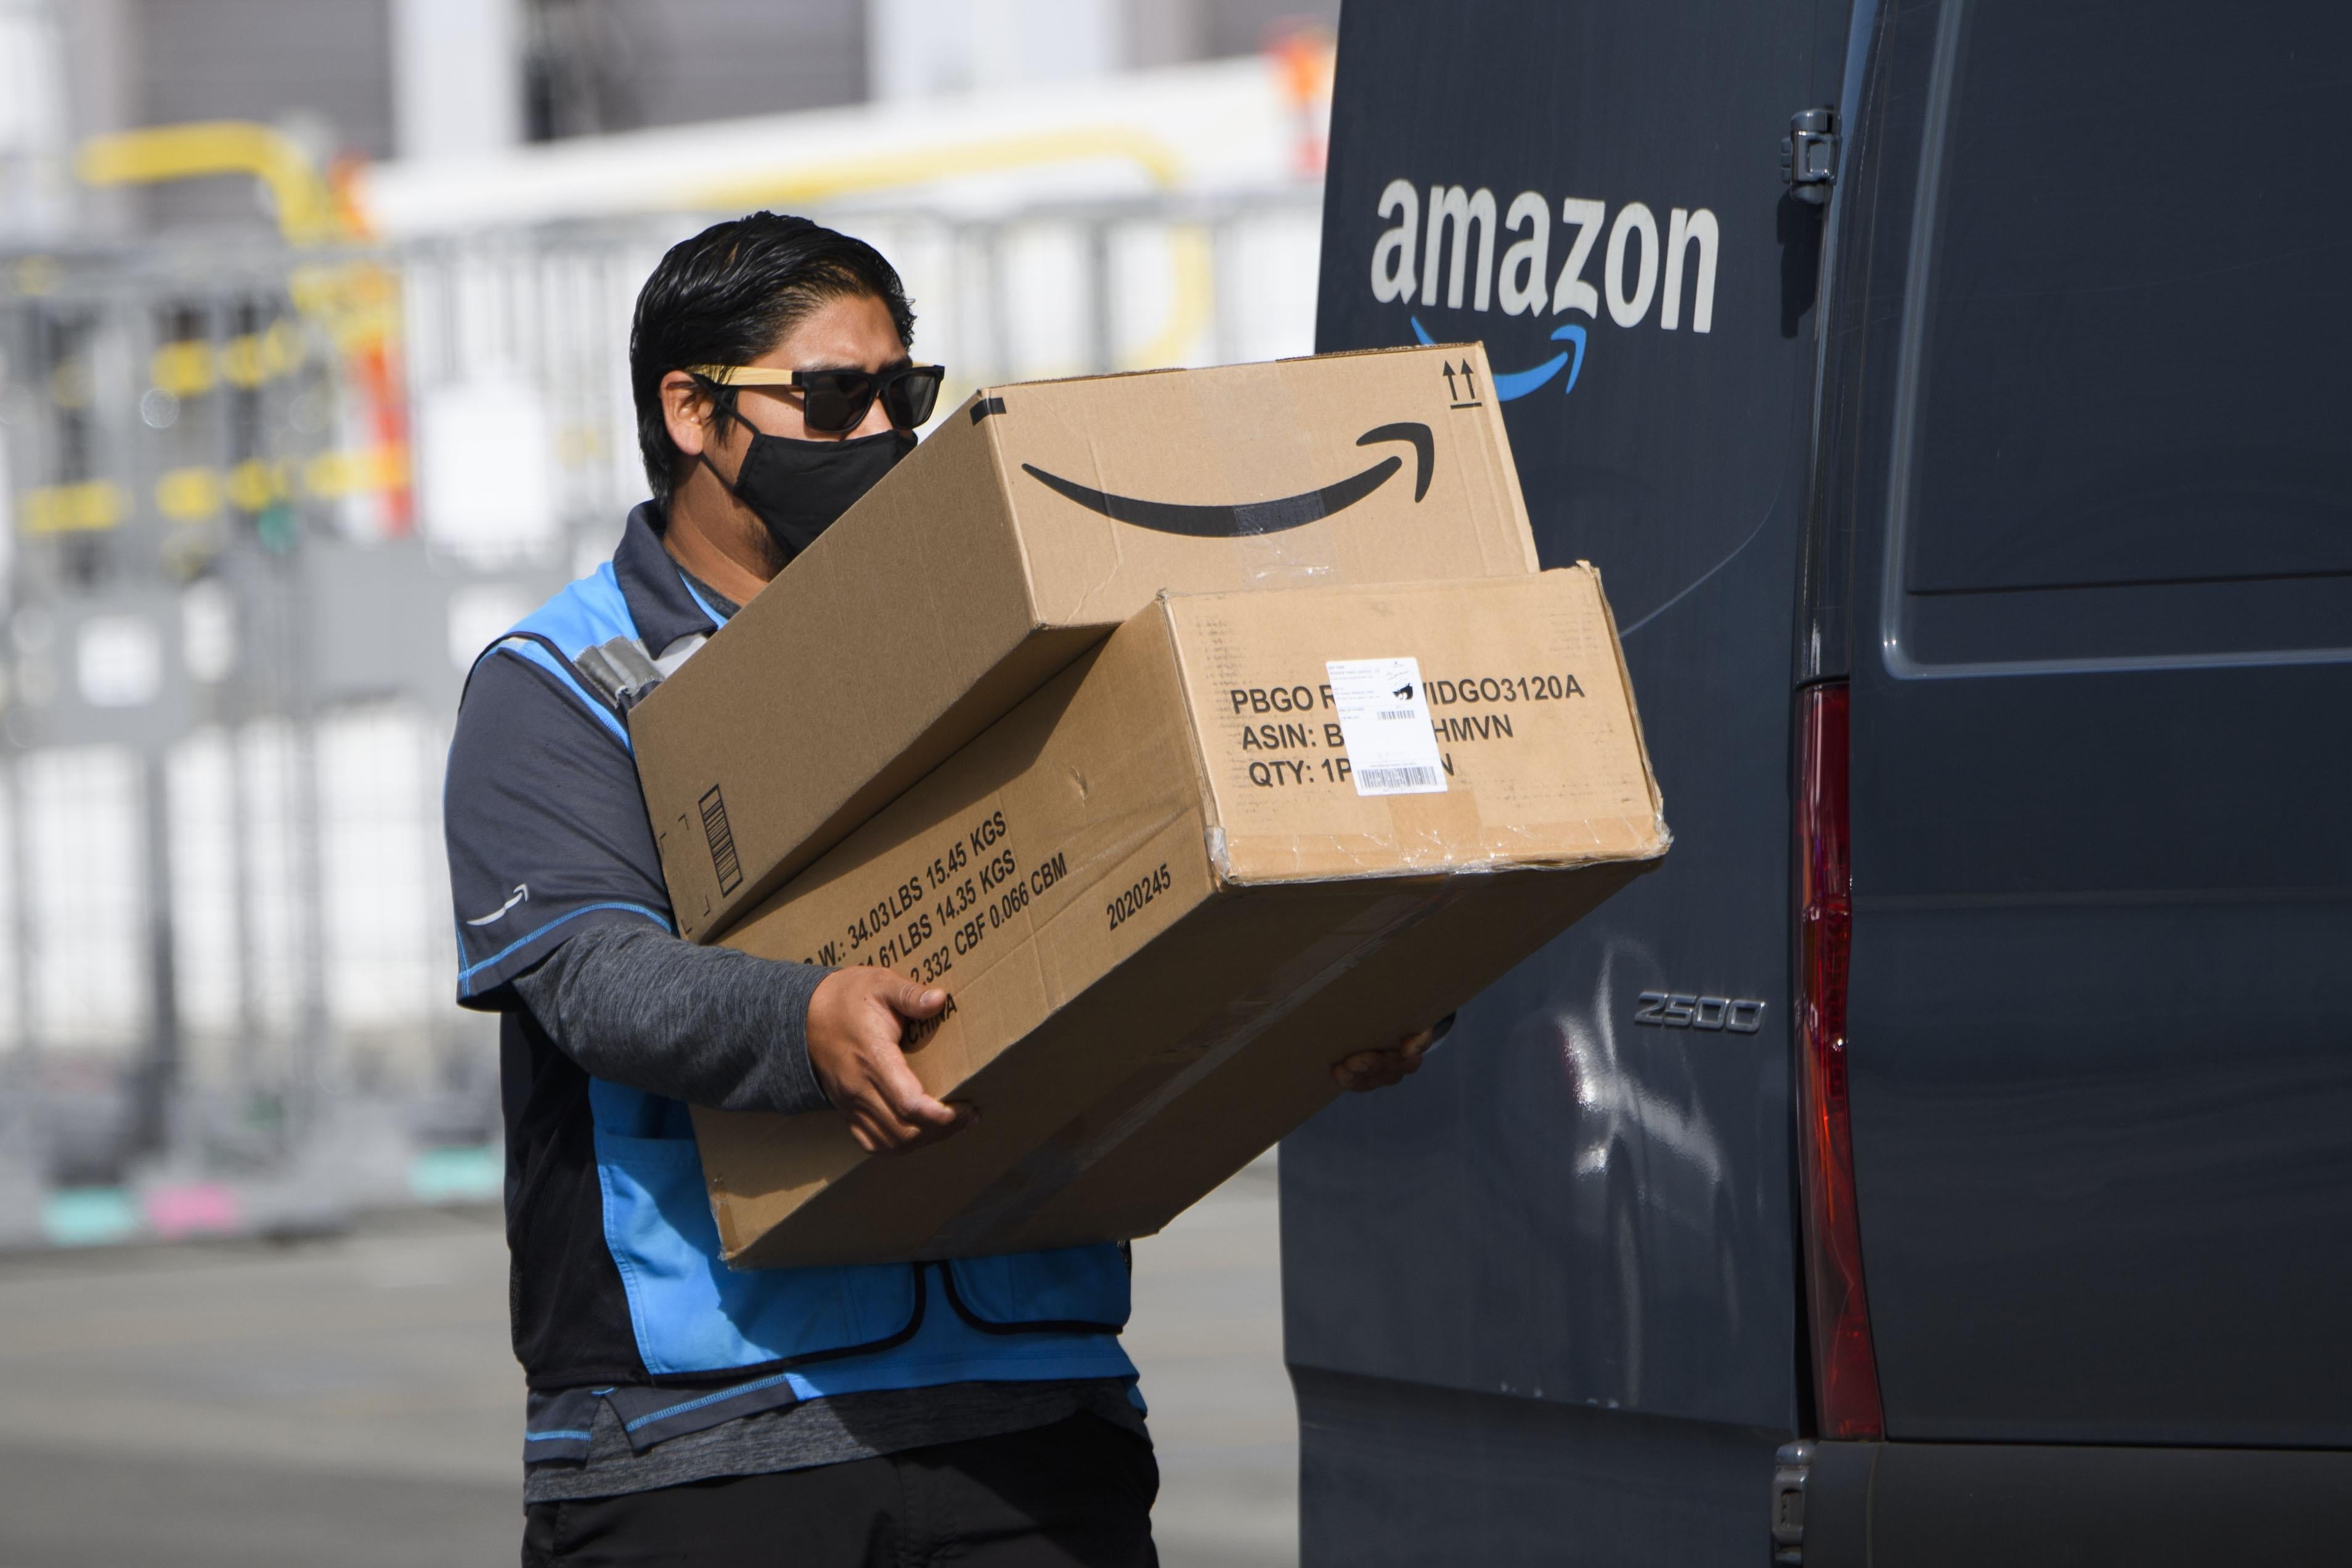 An Amazon delivery driver carries boxes into a van outside of a distribution facility on February 2, 2021 in Hawthorne, California.